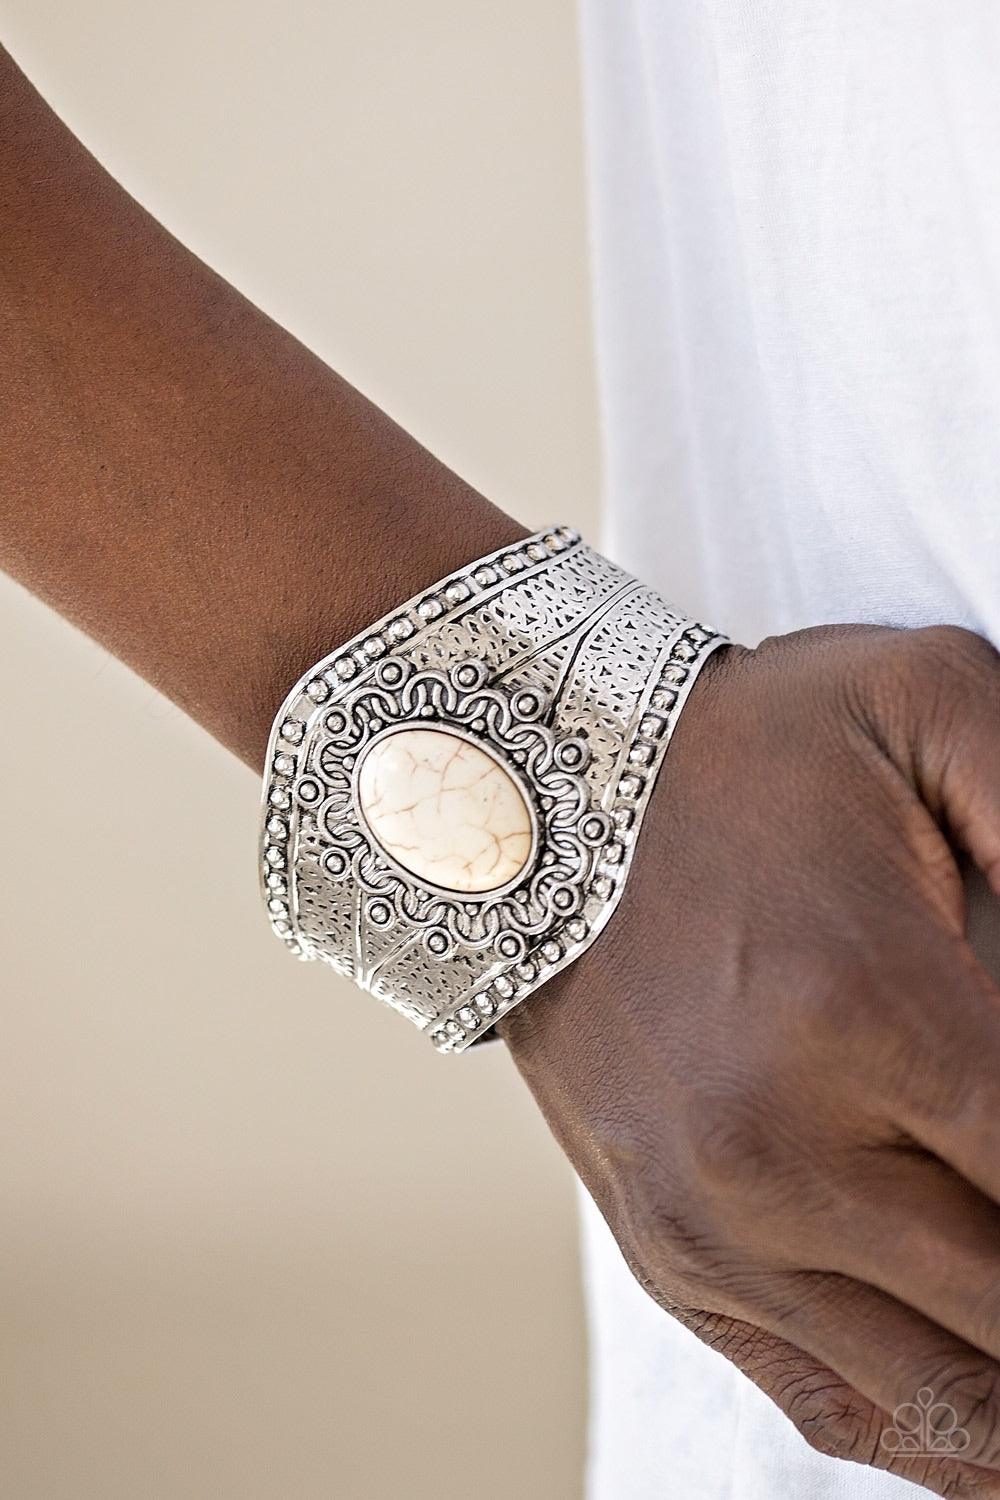 Paparazzi Accessories Majave Majesty - White Delicately hammered and studded in tribal inspired textures, a thick silver cuff wraps around the wrist in an artisan inspired fashion. A smooth white stone is pressed into the middle of a silver sunburst patte